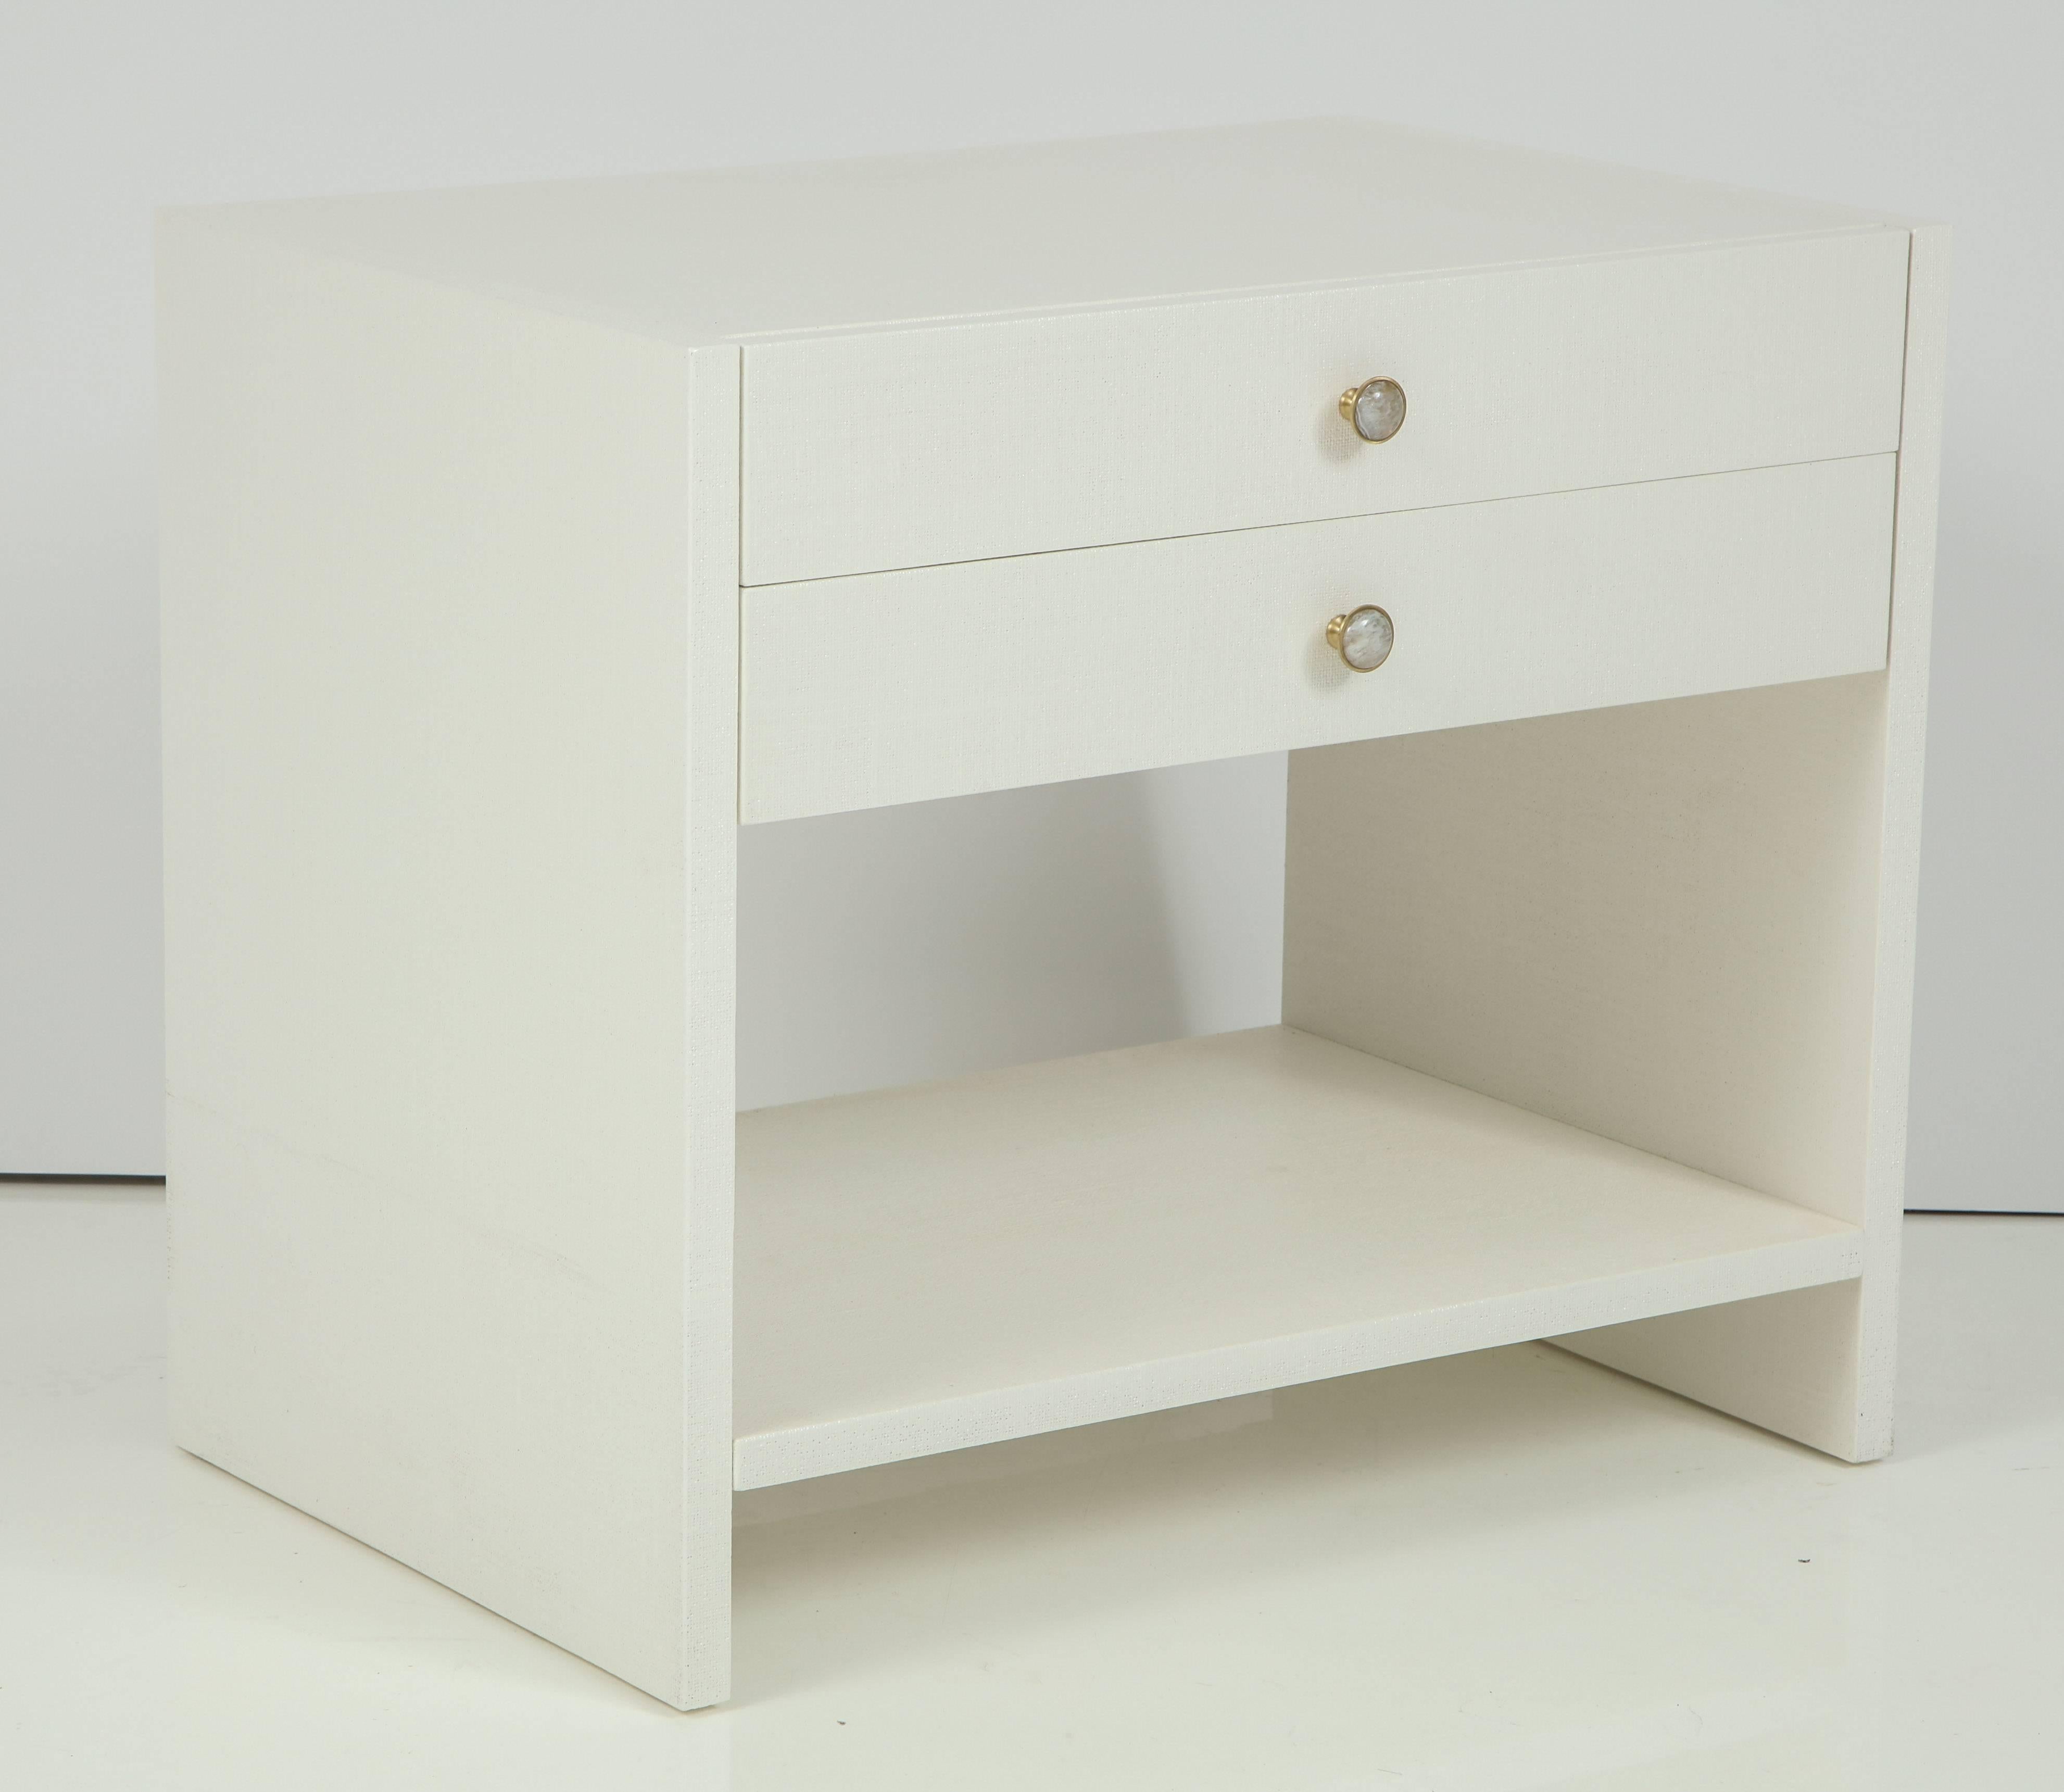 Pair of 1970s custom-made nightstands in off-white lacquered linen and cabachon crysta quartzl and brass knobs. Each nightstand has two pull-out shelves and shelf. Mint restored condition.